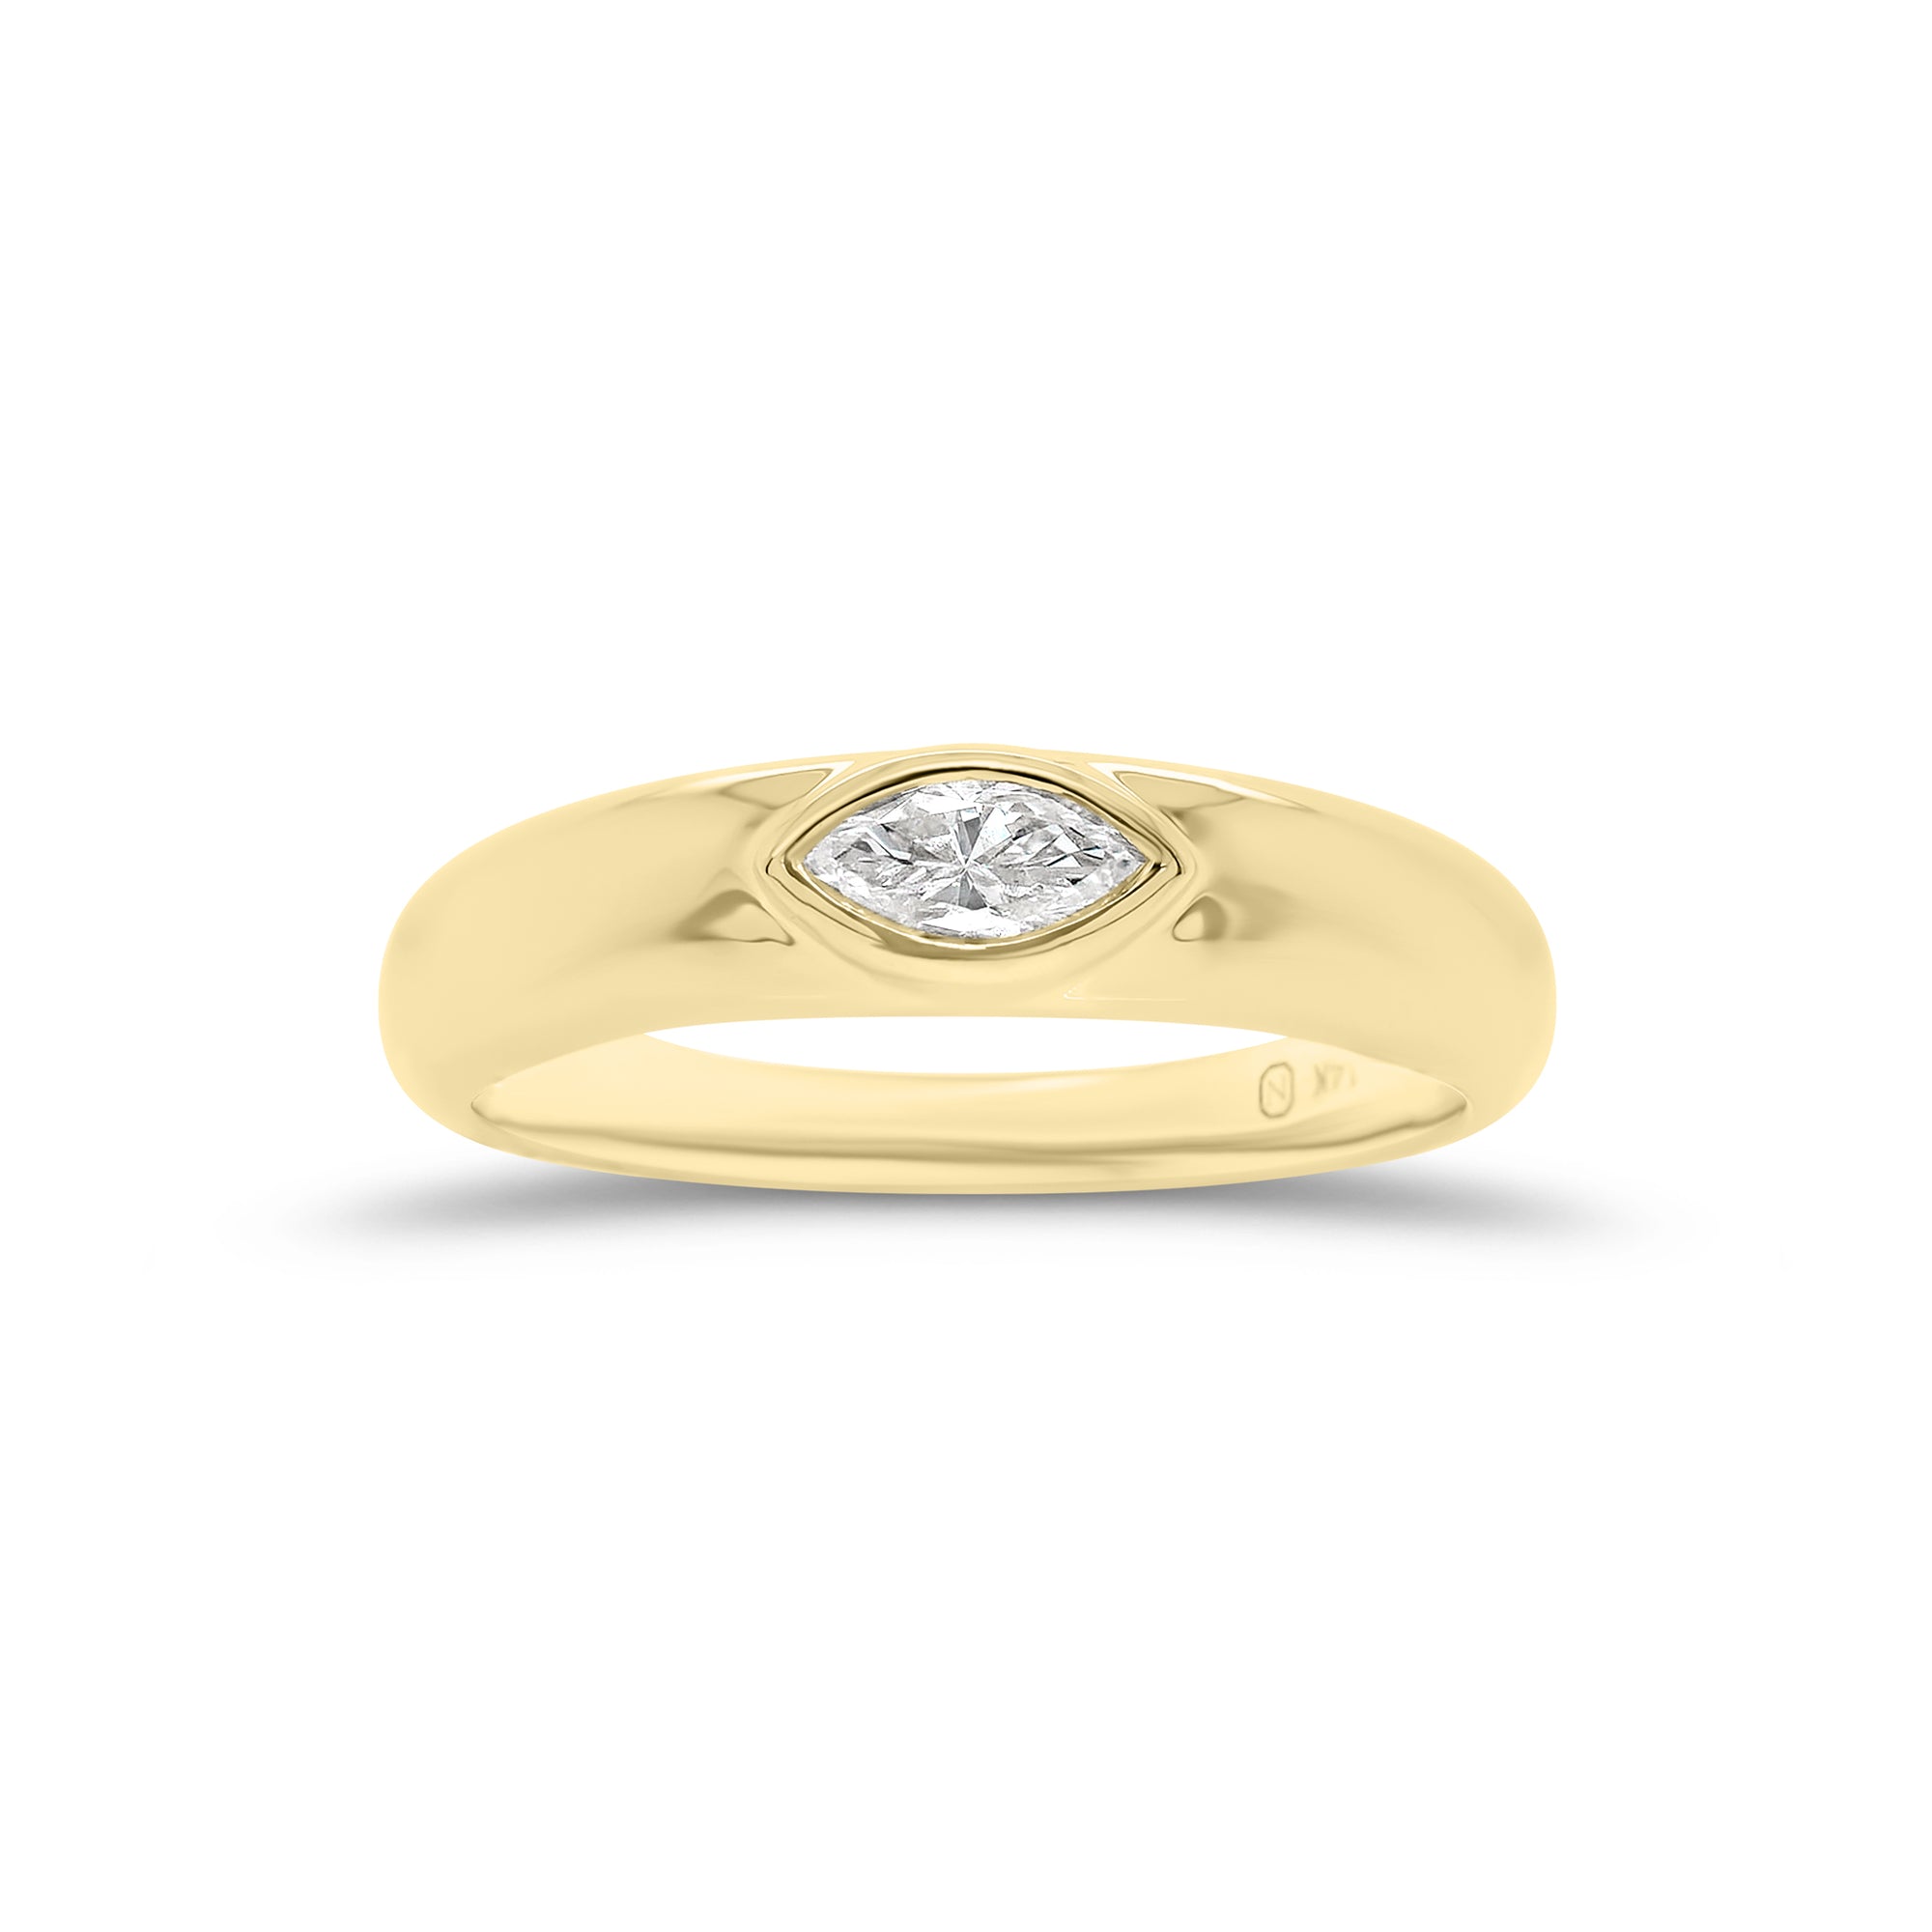 Bezel-Set Marquise Diamond Band - 14K gold weighing 3.05 grams  - 0.23 ct marquise-shaped diamond